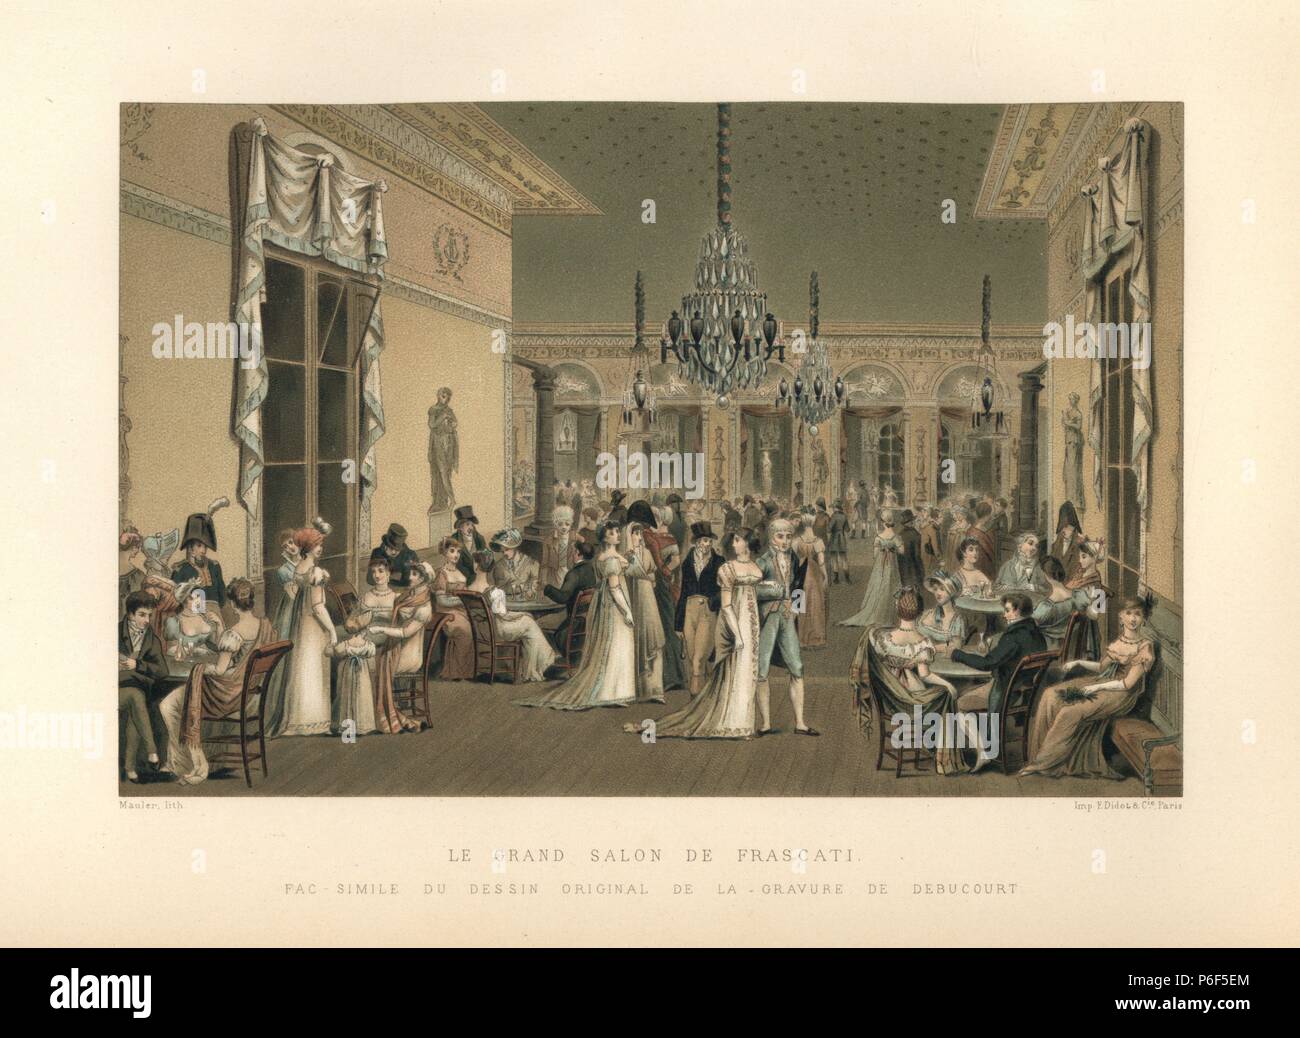 The great hall at Frascati, a famous salon for parties, balls, concerts and gambling, in Paris, circa 1800. Drawn by Debucourt, chromolithograph by Mauler from Paul Lacroix's 'Directoire, Consulat et Empire,' Paris, 1884. Stock Photo